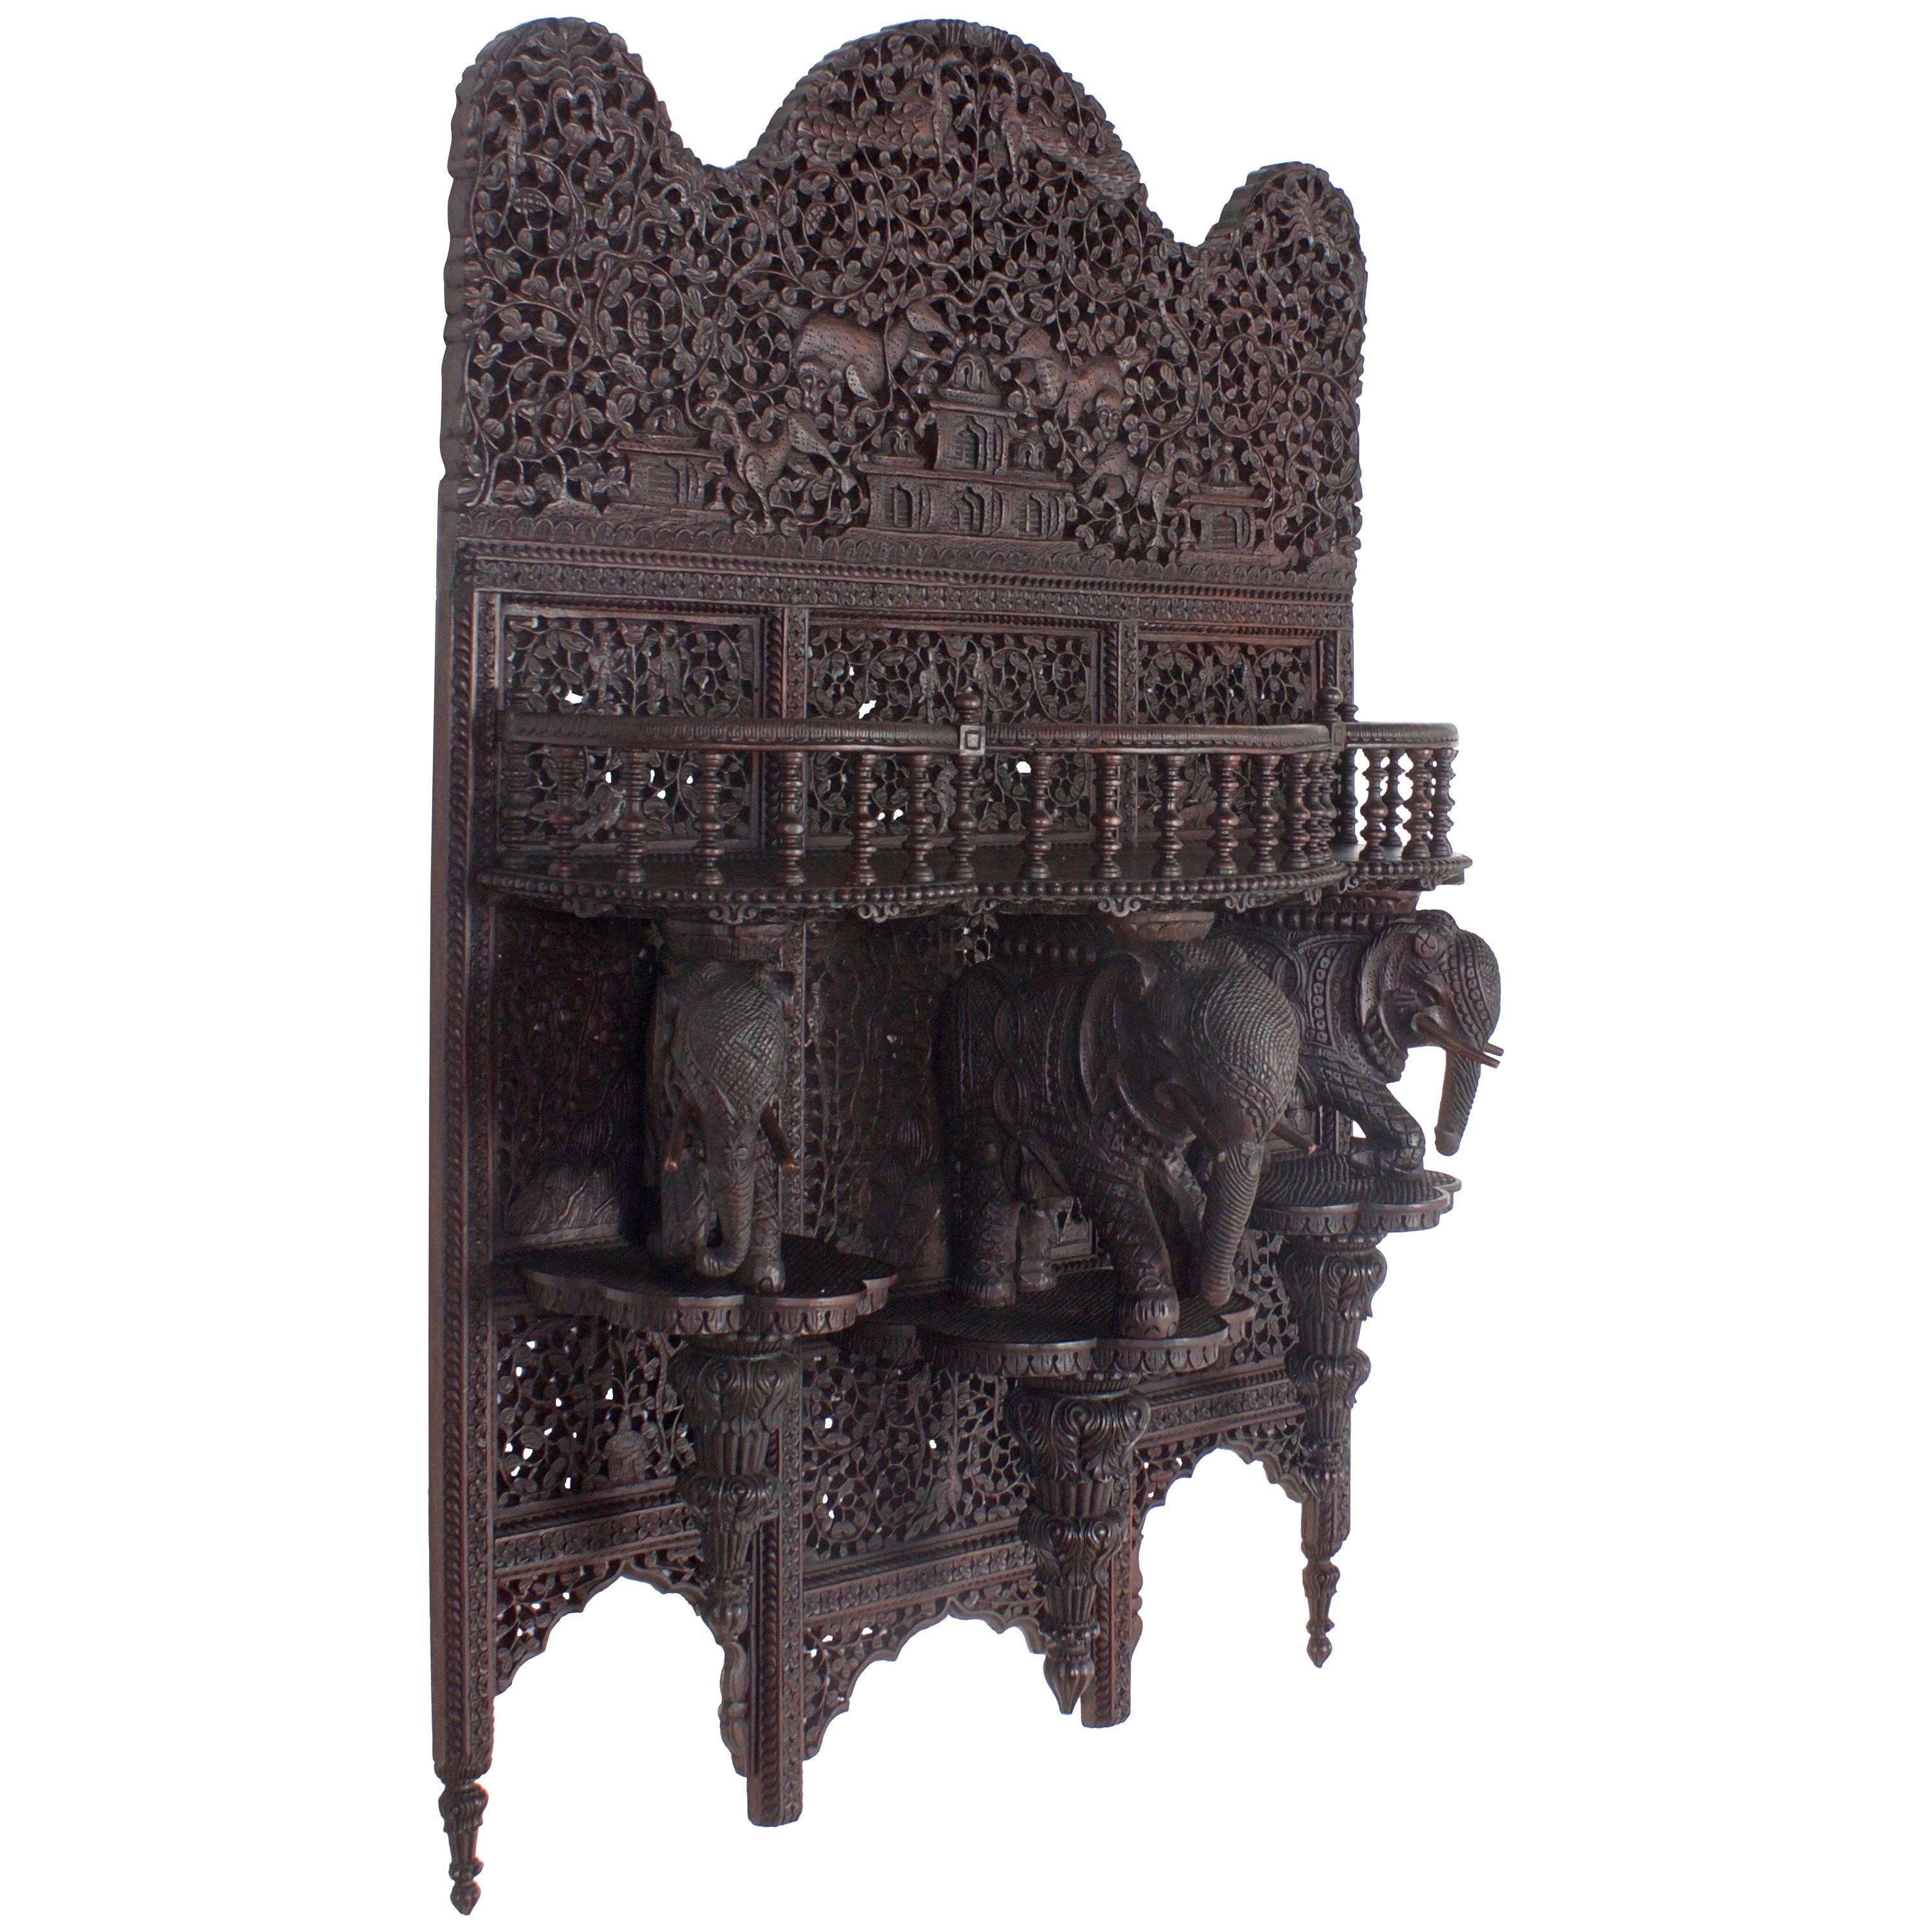 Antique Anglo-Indian Carved Wall Shelf